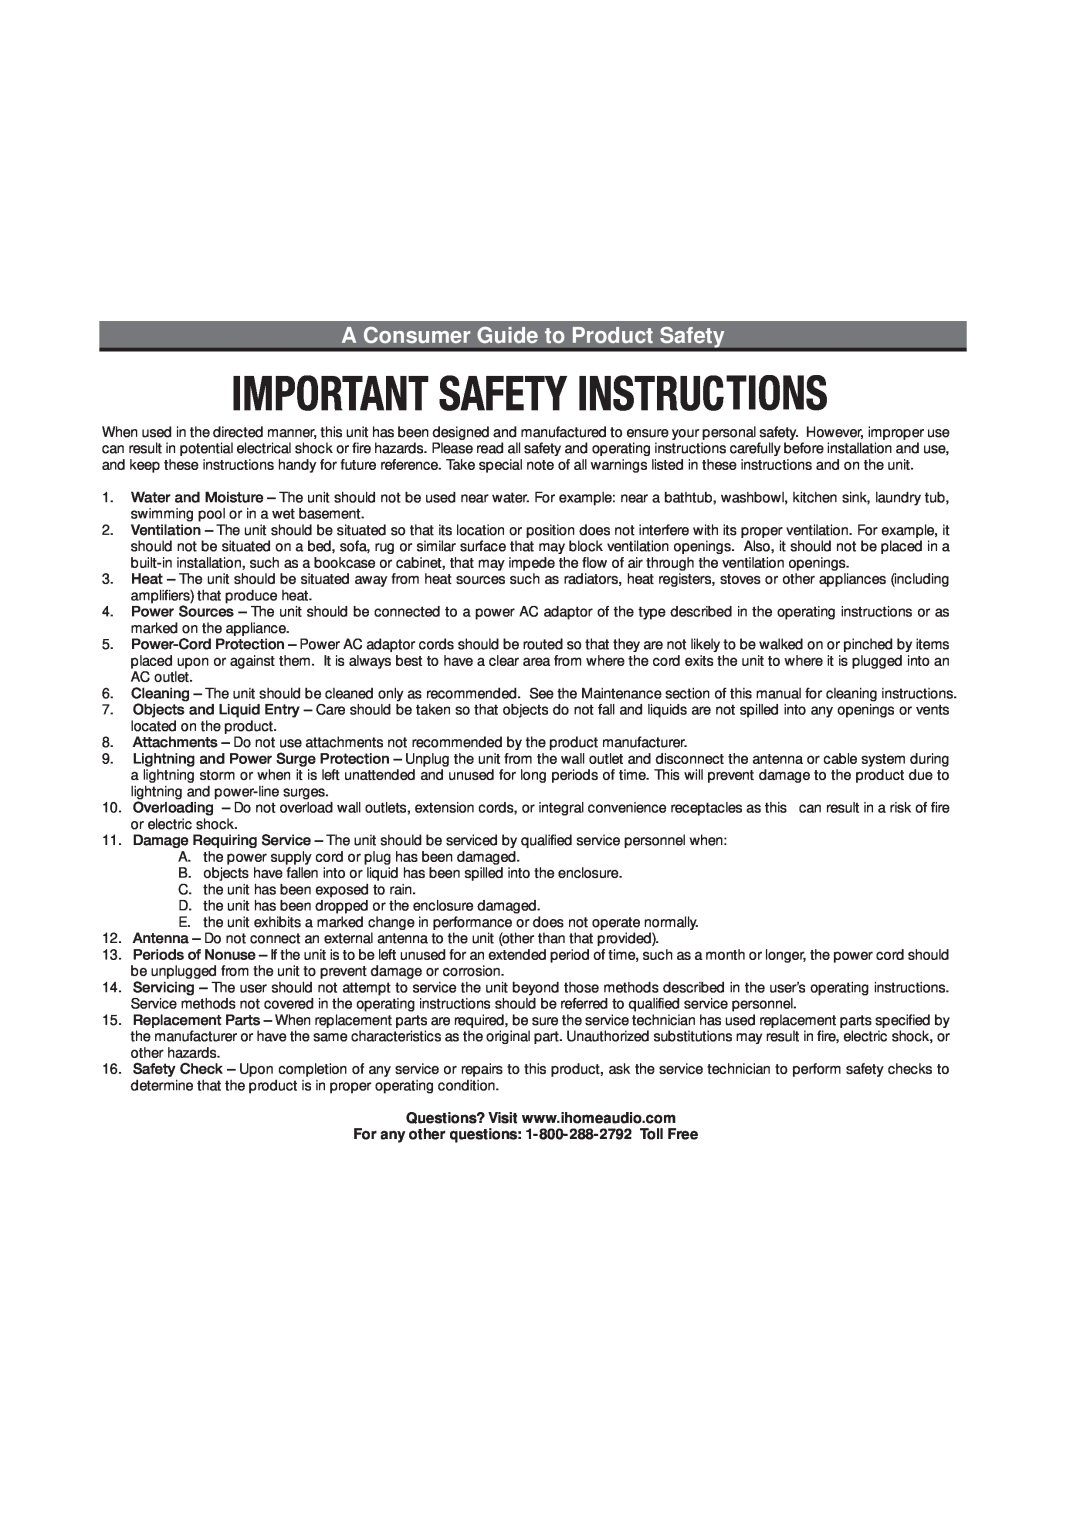 iHome iP99 manual A Consumer Guide to Product Safety 